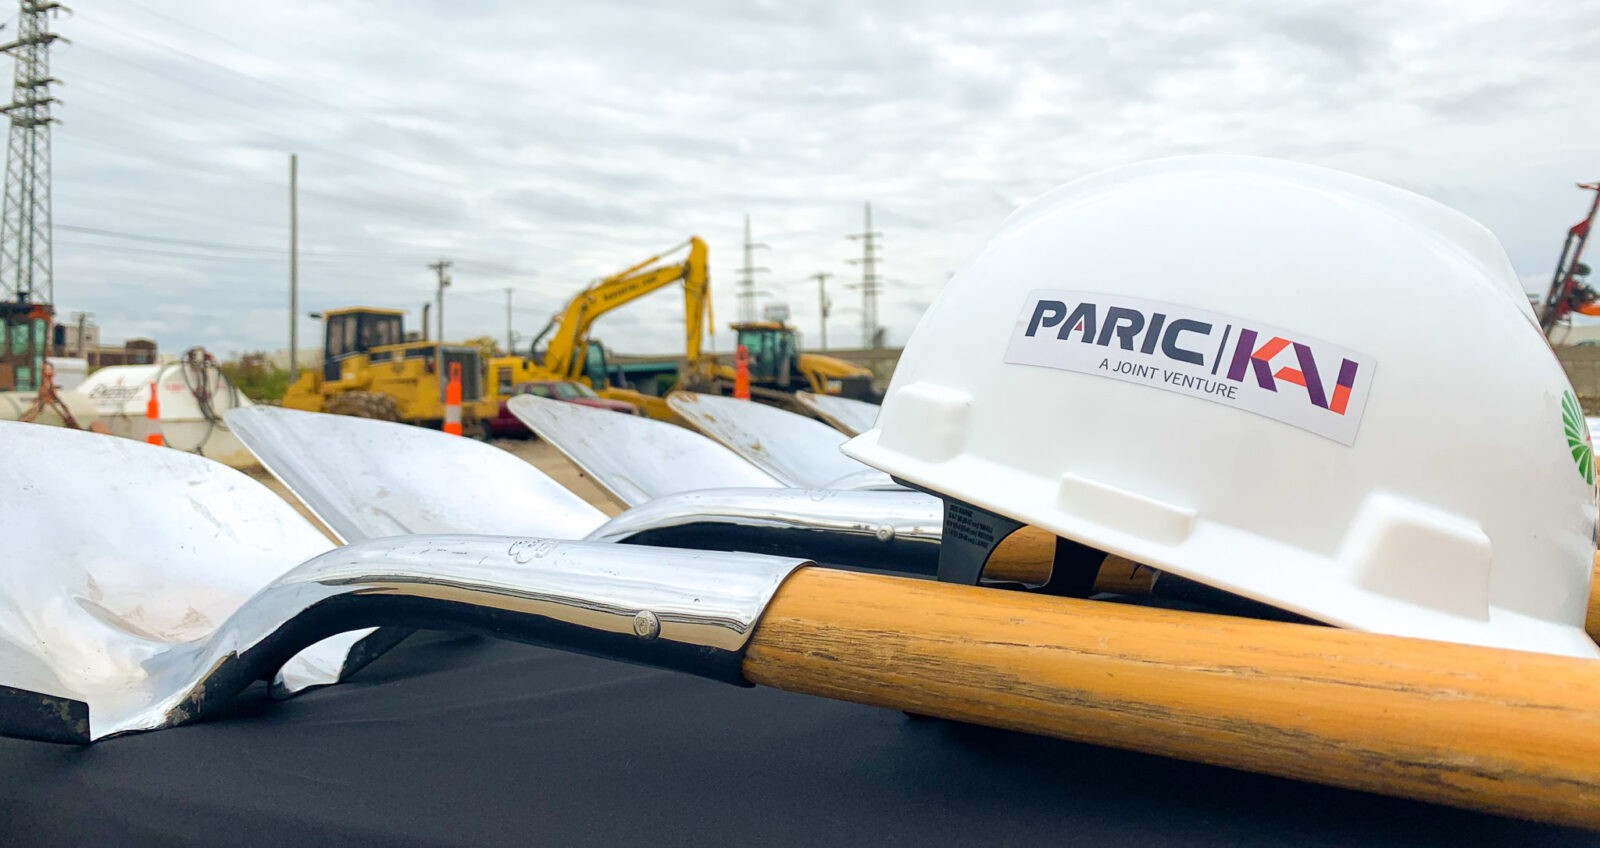 KAI and PARIC construction hat and shovels for the Ameren Missouri Operating Center groundbreaking ceremony